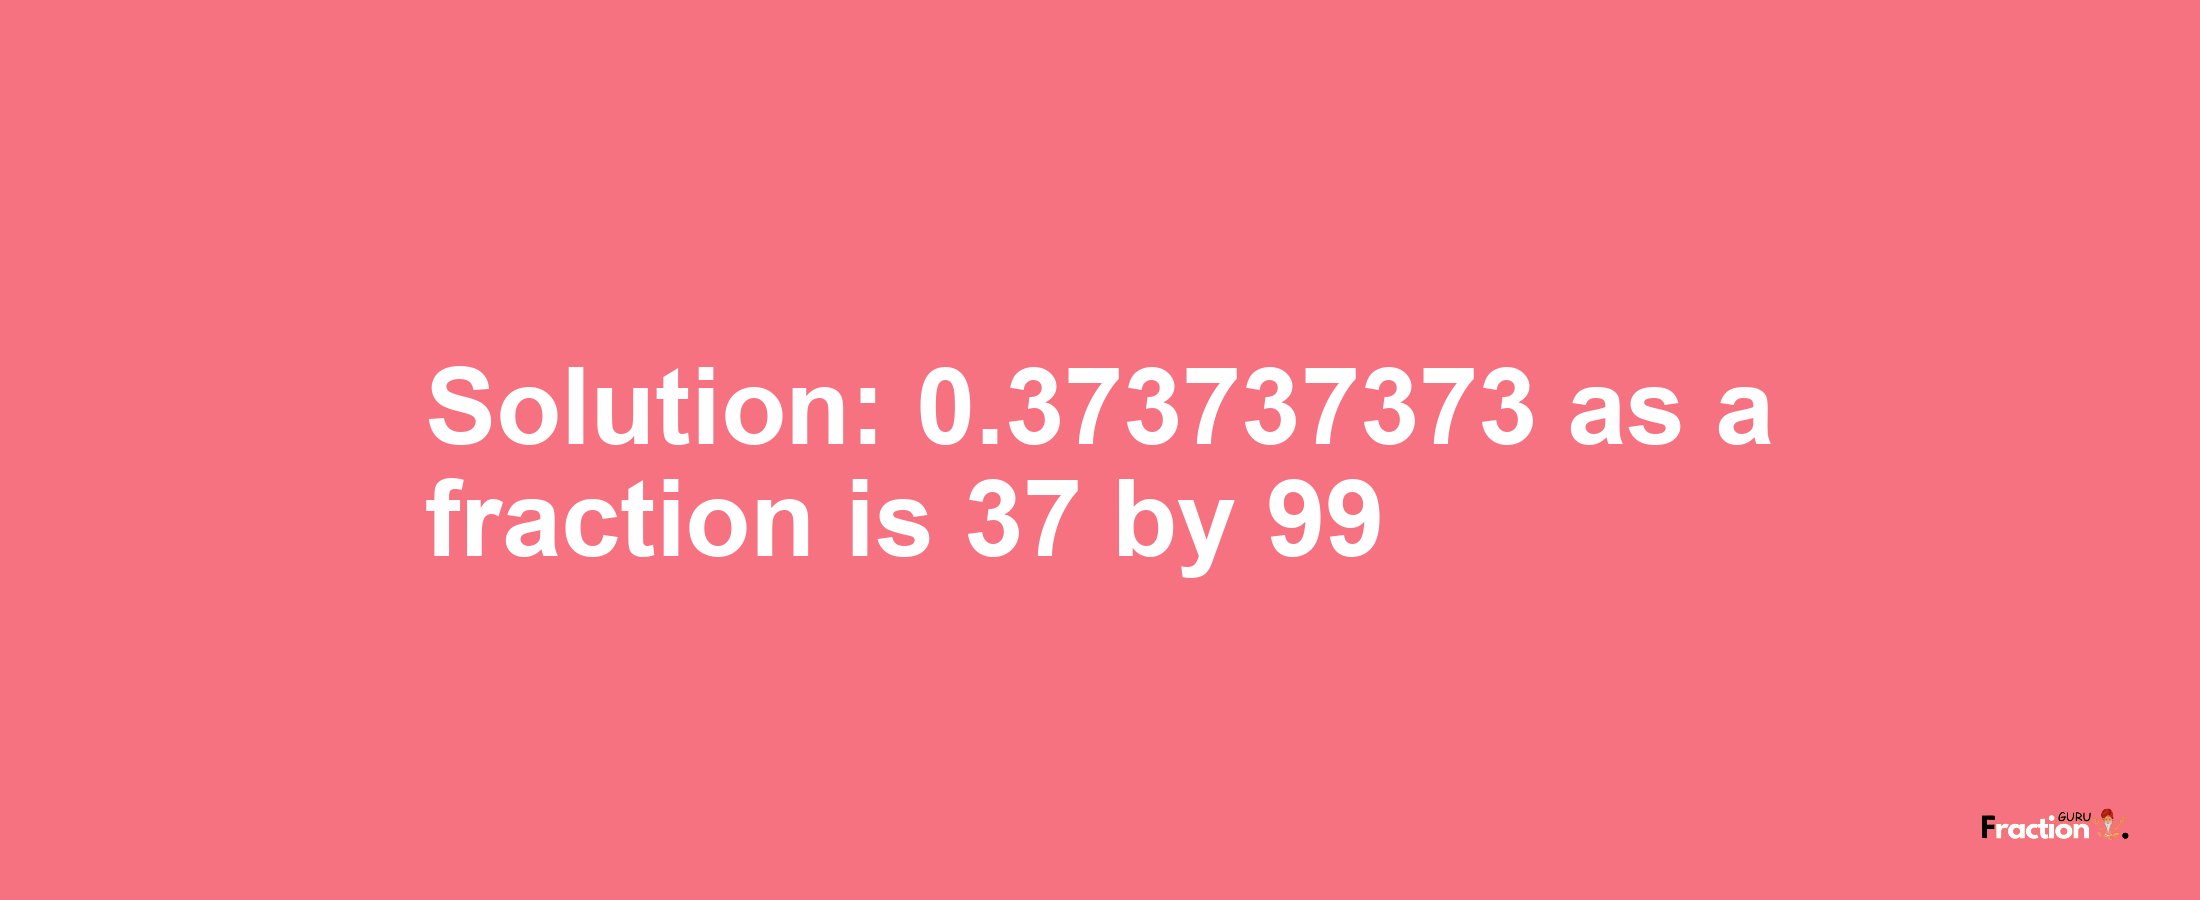 Solution:0.373737373 as a fraction is 37/99